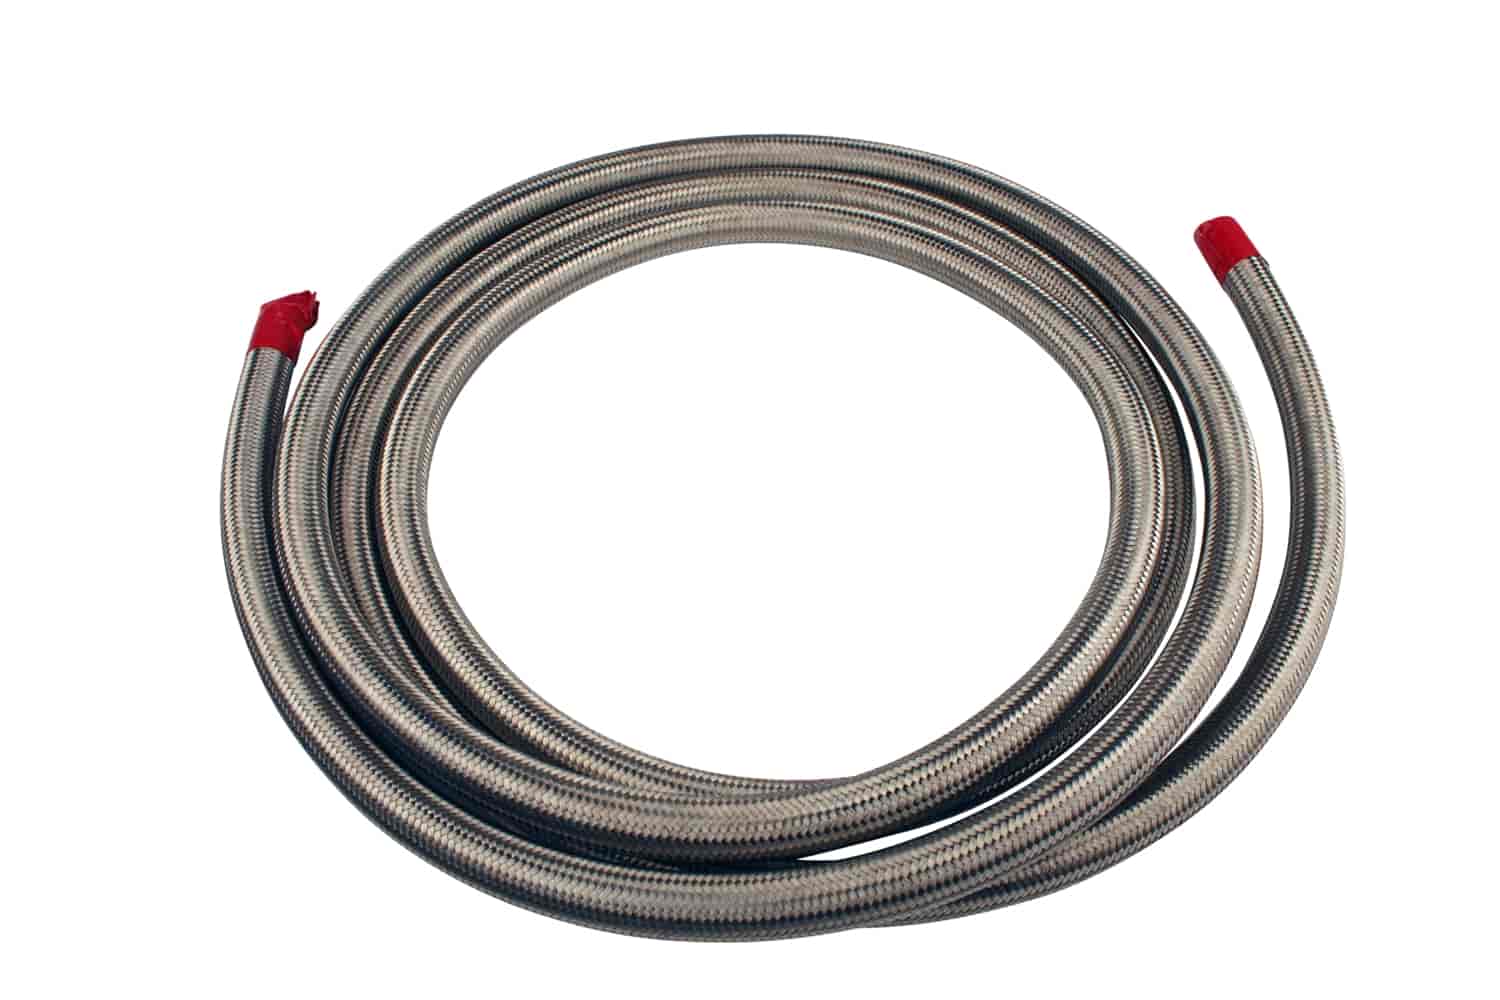 Braided Stainless Steel Fuel Hose -10AN x 12 ft